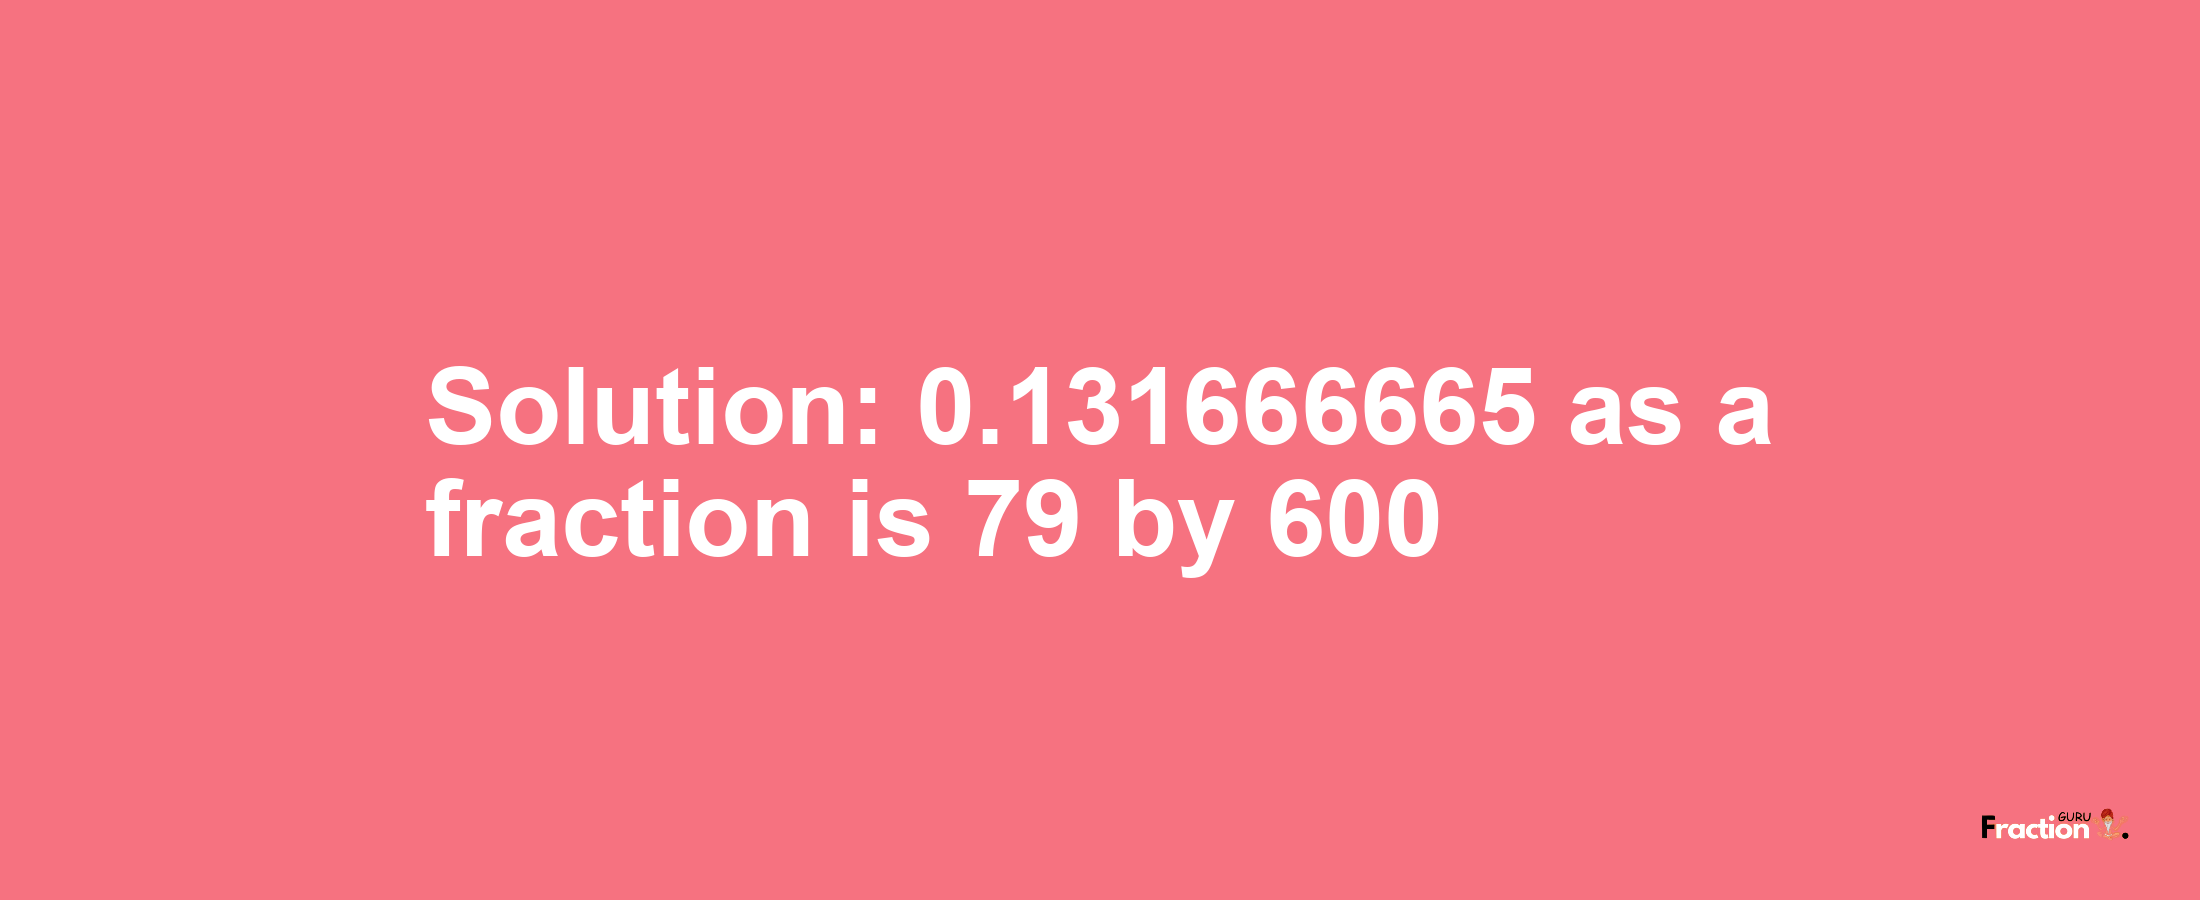 Solution:0.131666665 as a fraction is 79/600